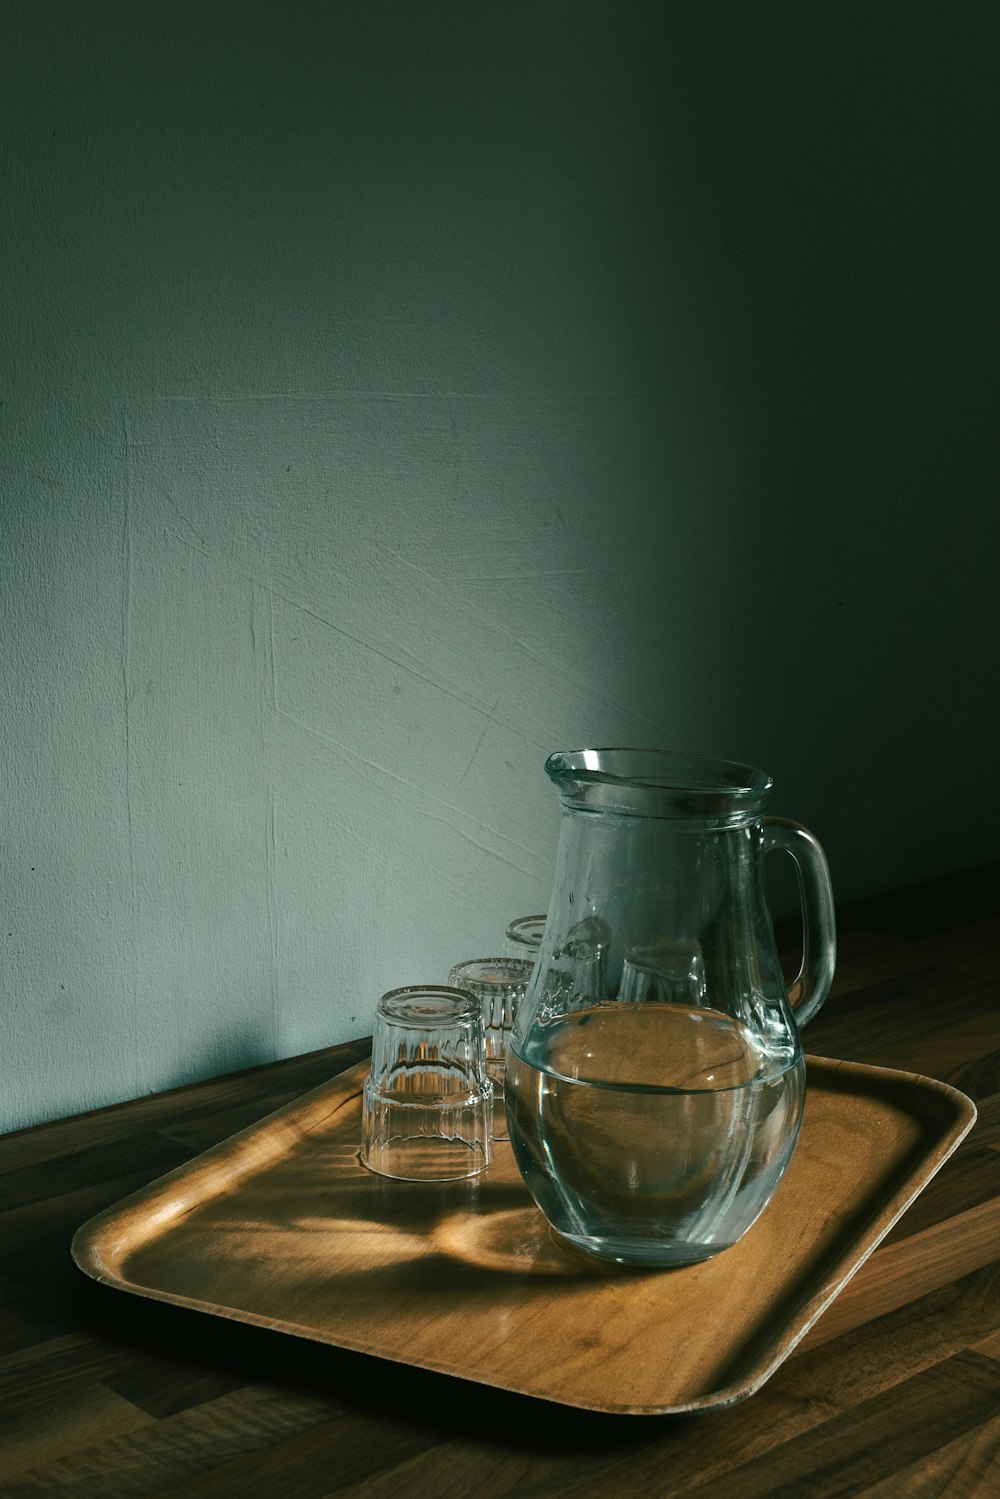 a glass pitcher and a glass pitcher on a wooden surface